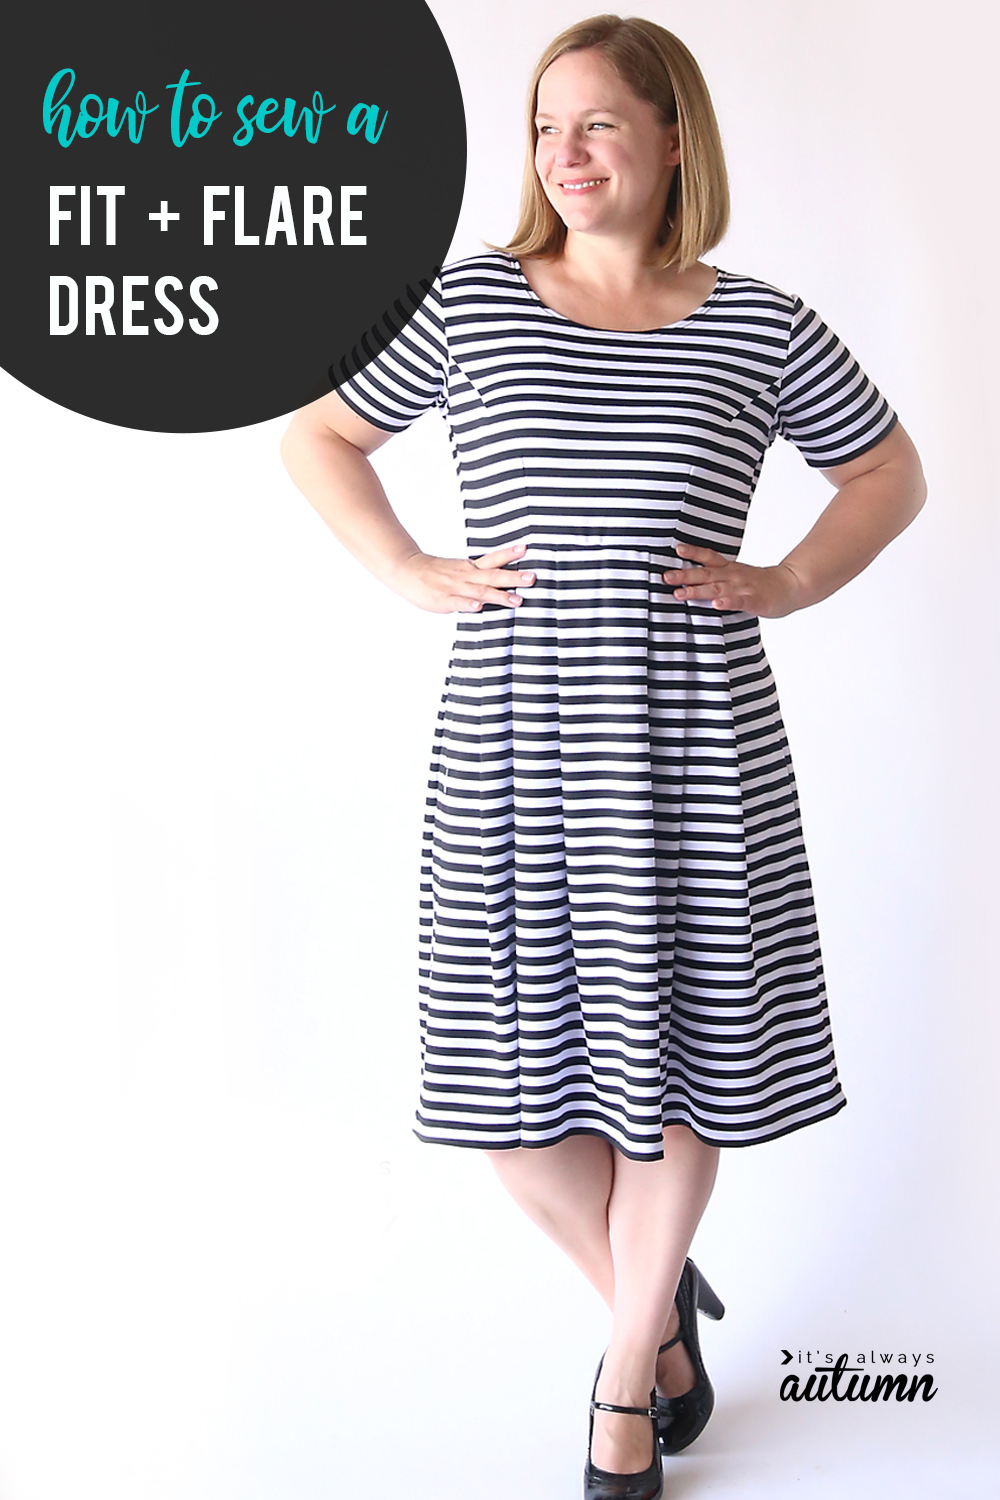 So Sew Easy Fit and Flare Dress pattern review by Danmar